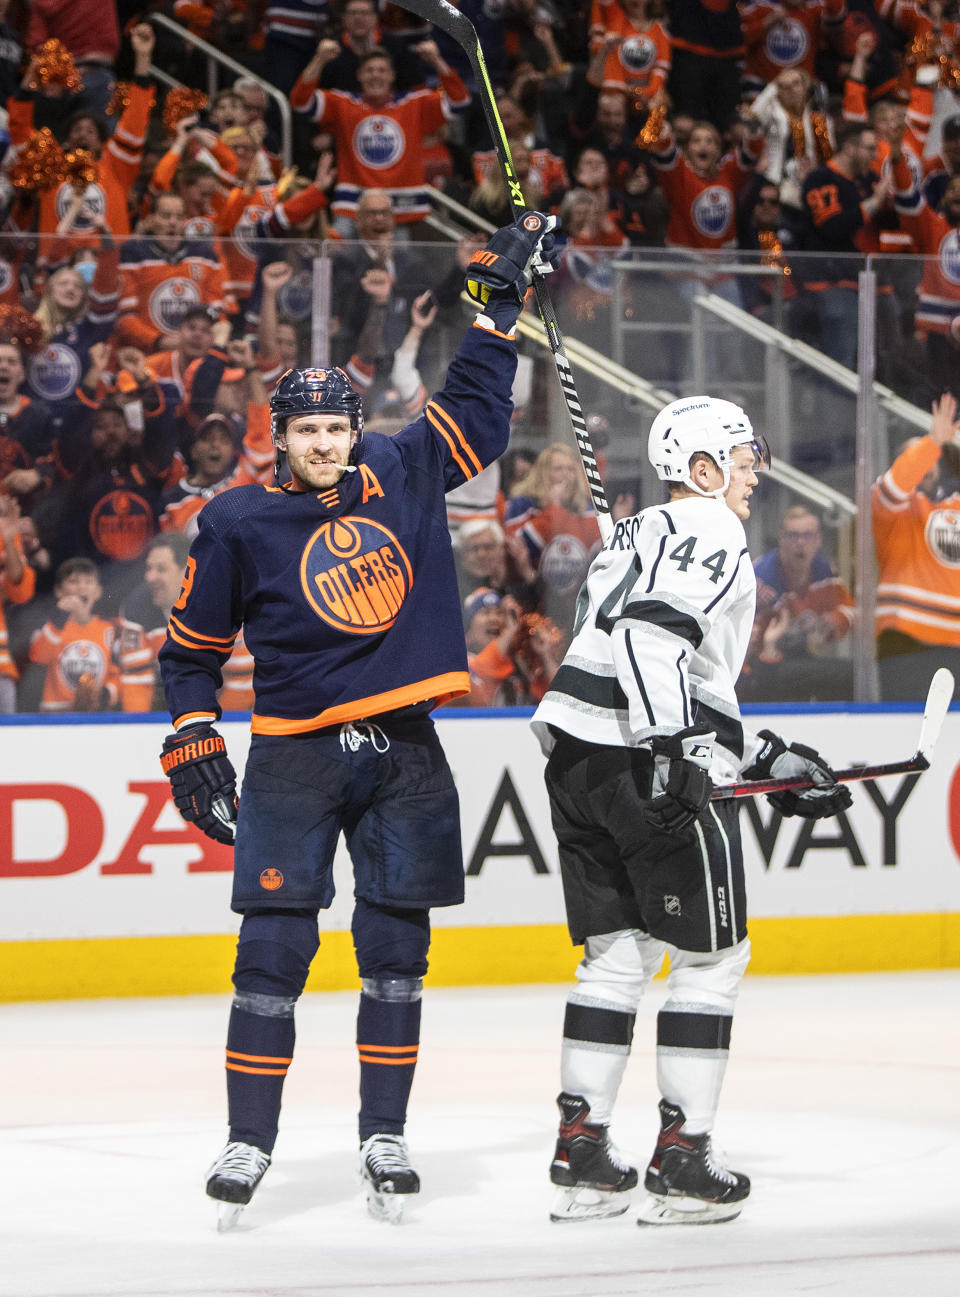 Los Angeles Kings' Mikey Anderson (44) skates by as Edmonton Oilers' Leon Draisaitl (29) celebrates a goal during the second period of Game 1 of an NHL hockey Stanley Cup first-round playoff series, Monday, May 2, 2022 in Edmonton, Alberta. (Jason Franson/The Canadian Press via AP)